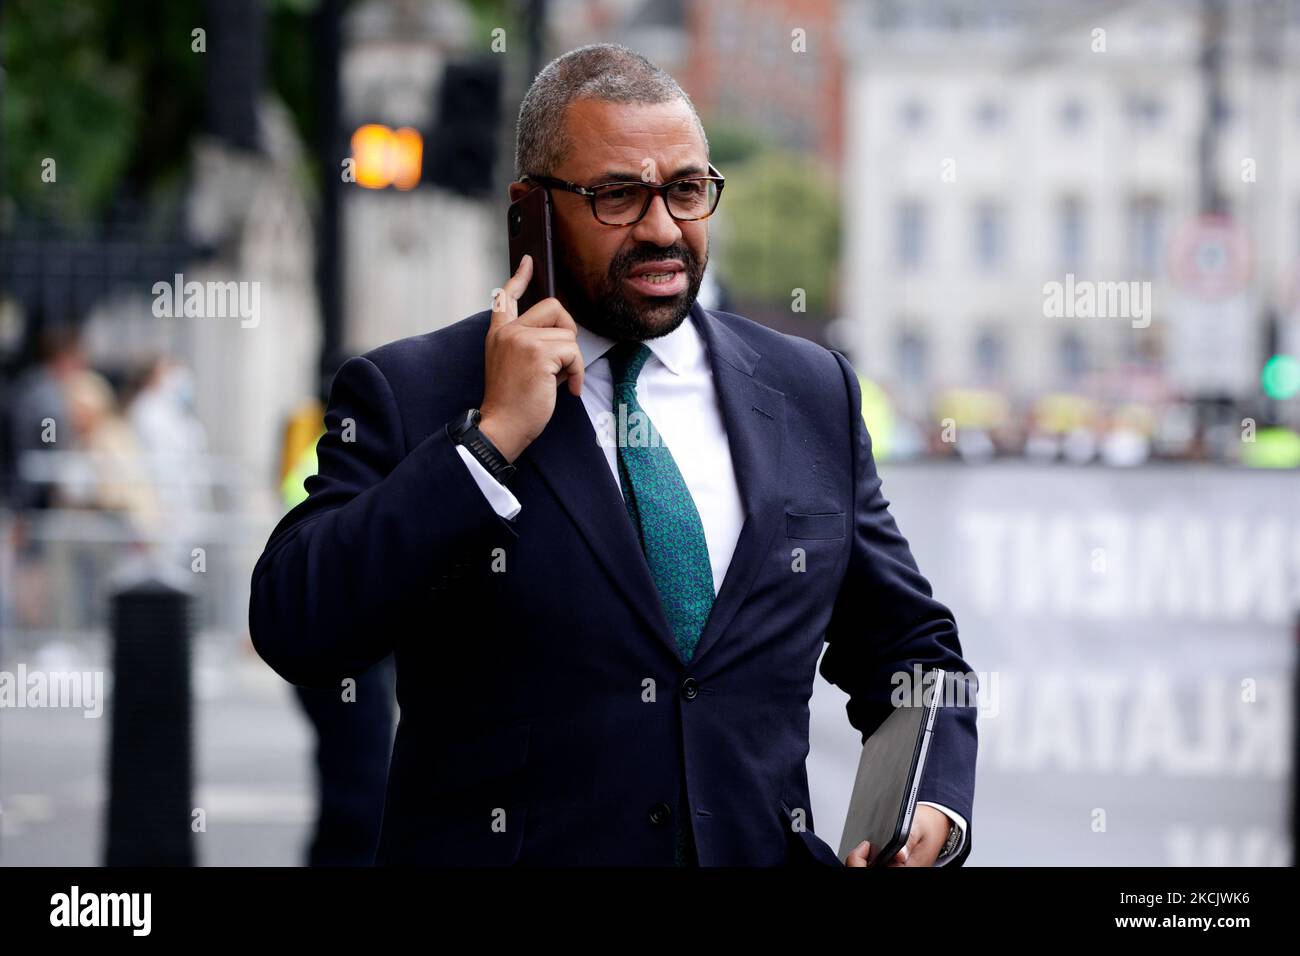 British Foreign Office Minister for Middle East and North Africa James Cleverly, Conservative Party MP for Braintree, walks along Parliament Street in Westminster in London, England, on August 18, 2021. (Photo by David Cliff/NurPhoto) Stock Photo